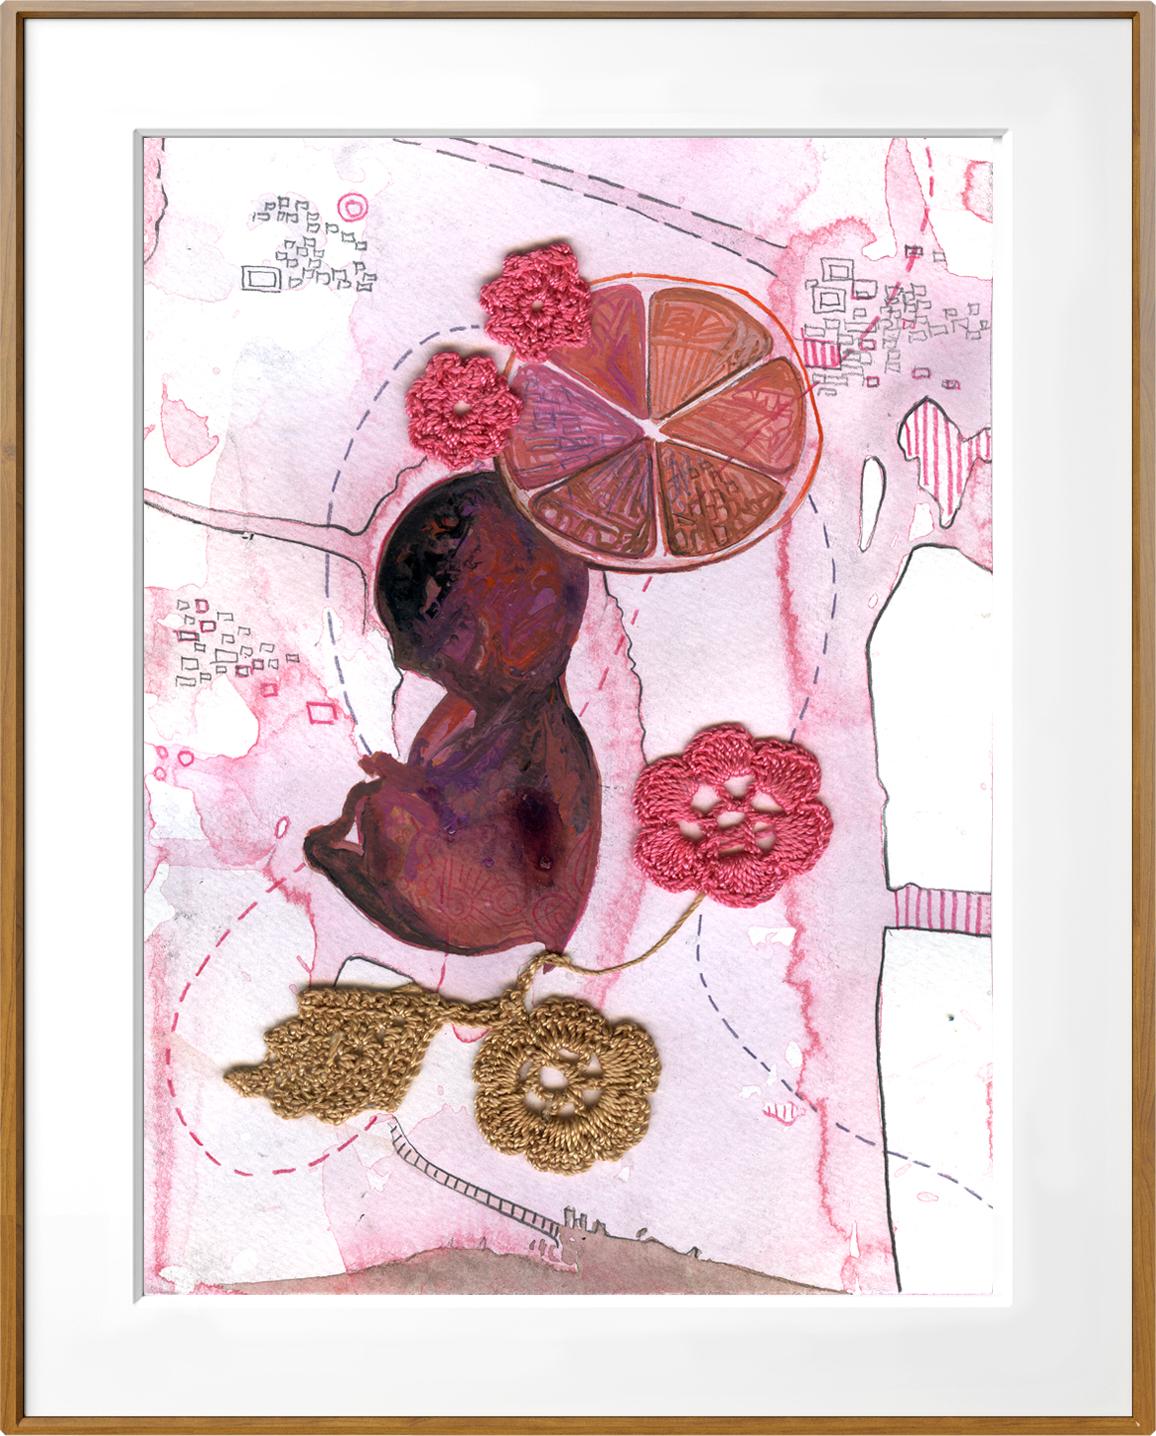 Birth Healing -  14 panel Pink, Red, and Grey Painting by Indian Artist  15